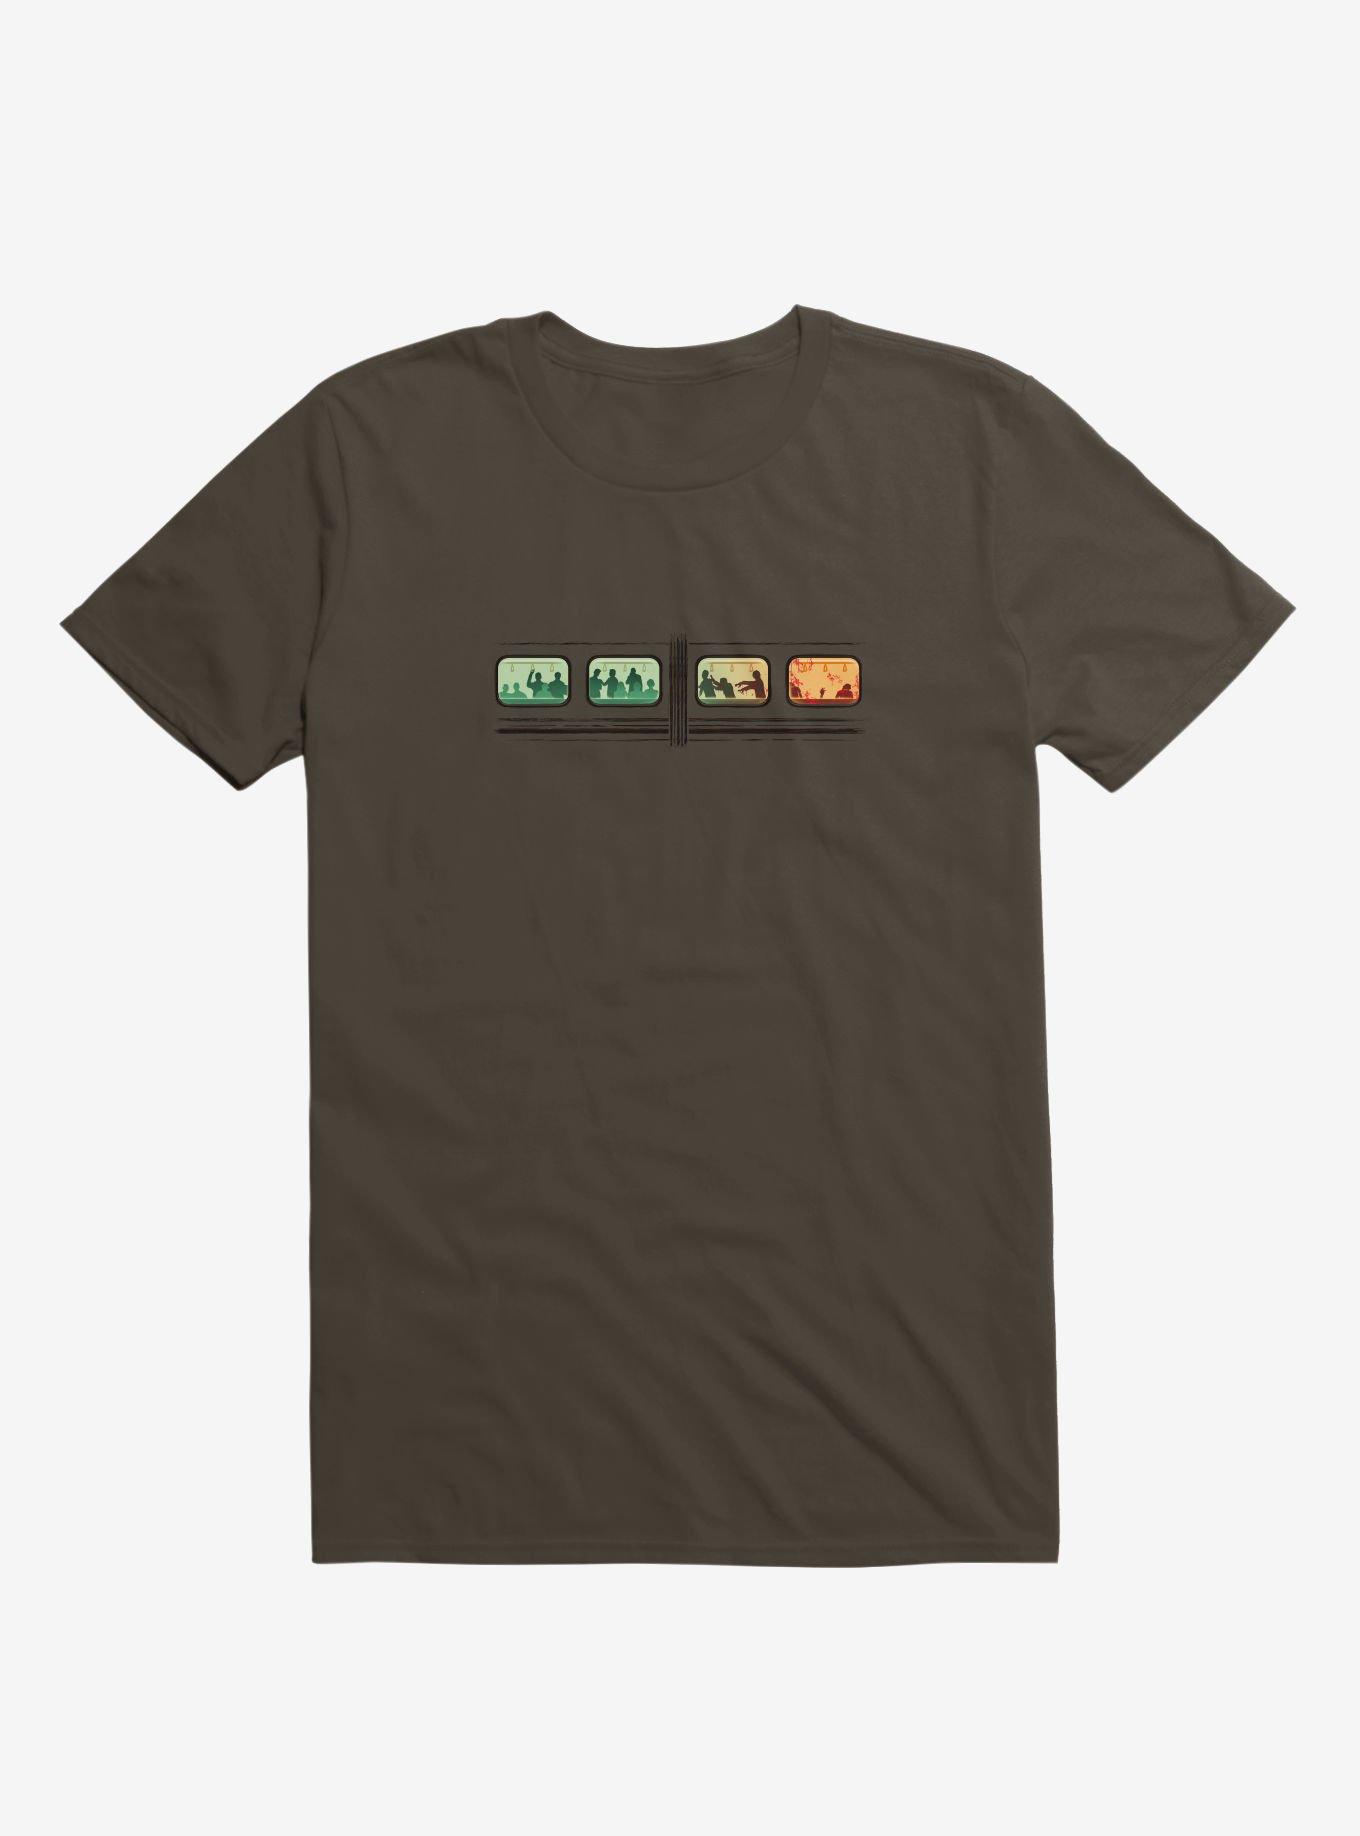 Early Morning Breakout T-Shirt, BROWN, hi-res